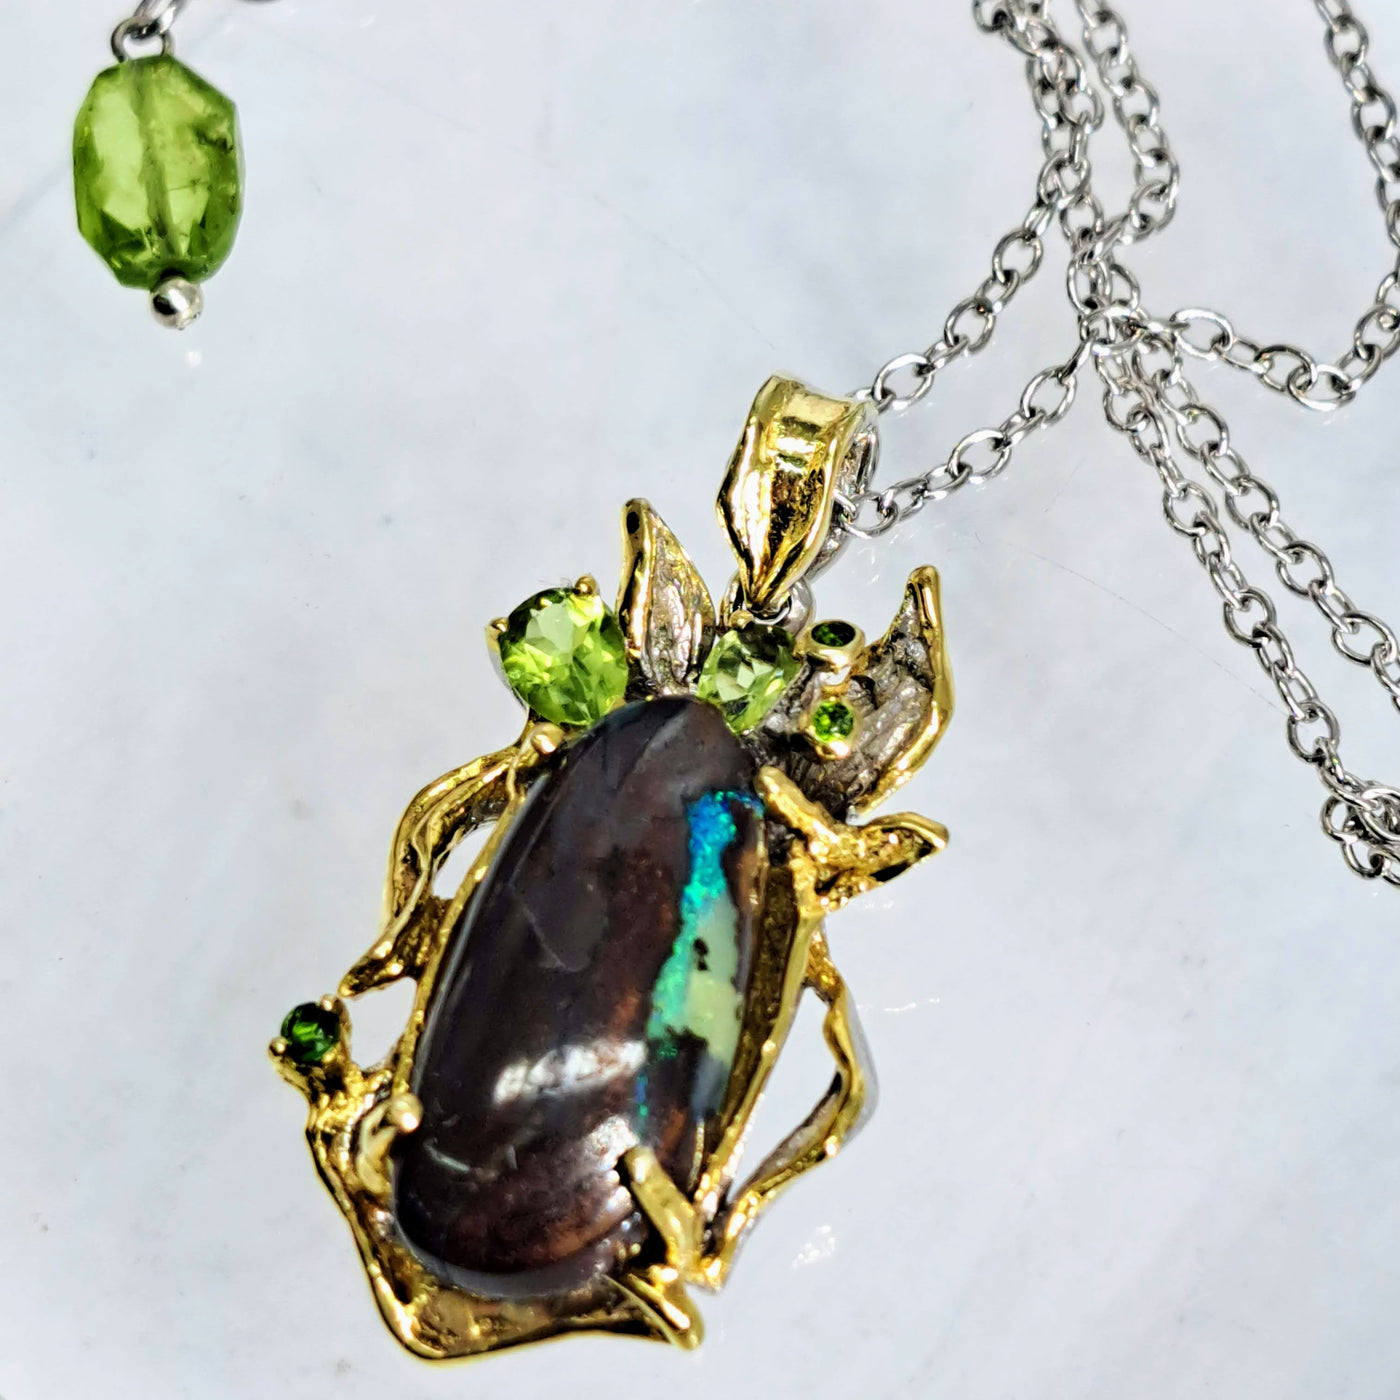 "Earthly Delights" Pendant Necklace - Opal Replaced Petrified Wood, Peridot, Chrome Diopside, 18k Gold, Anti-Tarnish Sterling